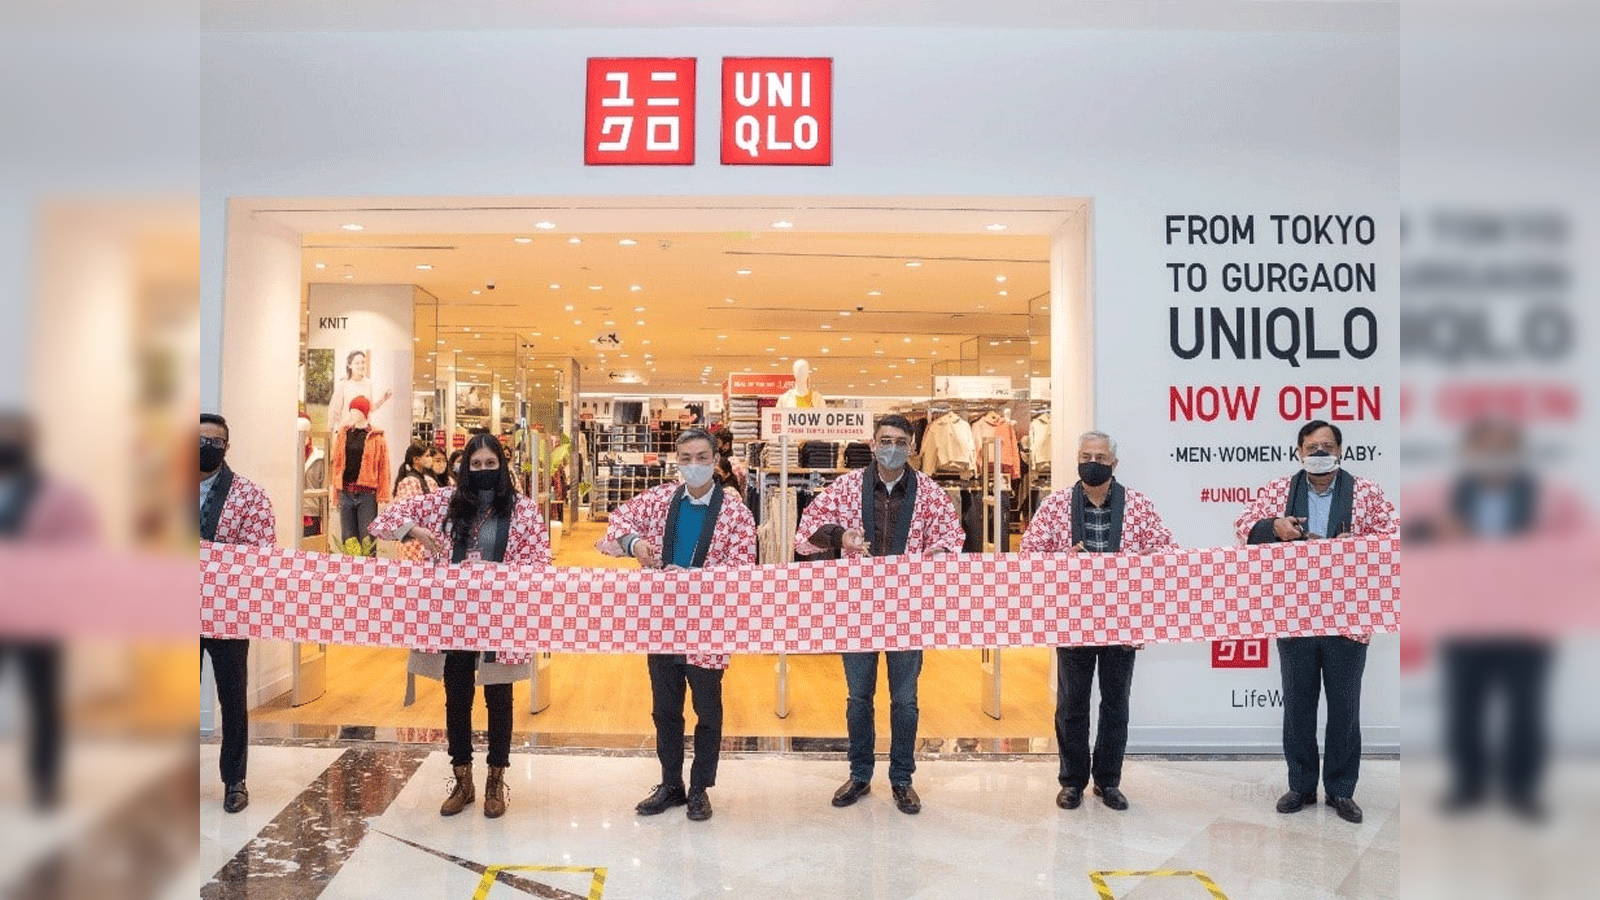 Forever 21 expands national footprint with its 15th store in India